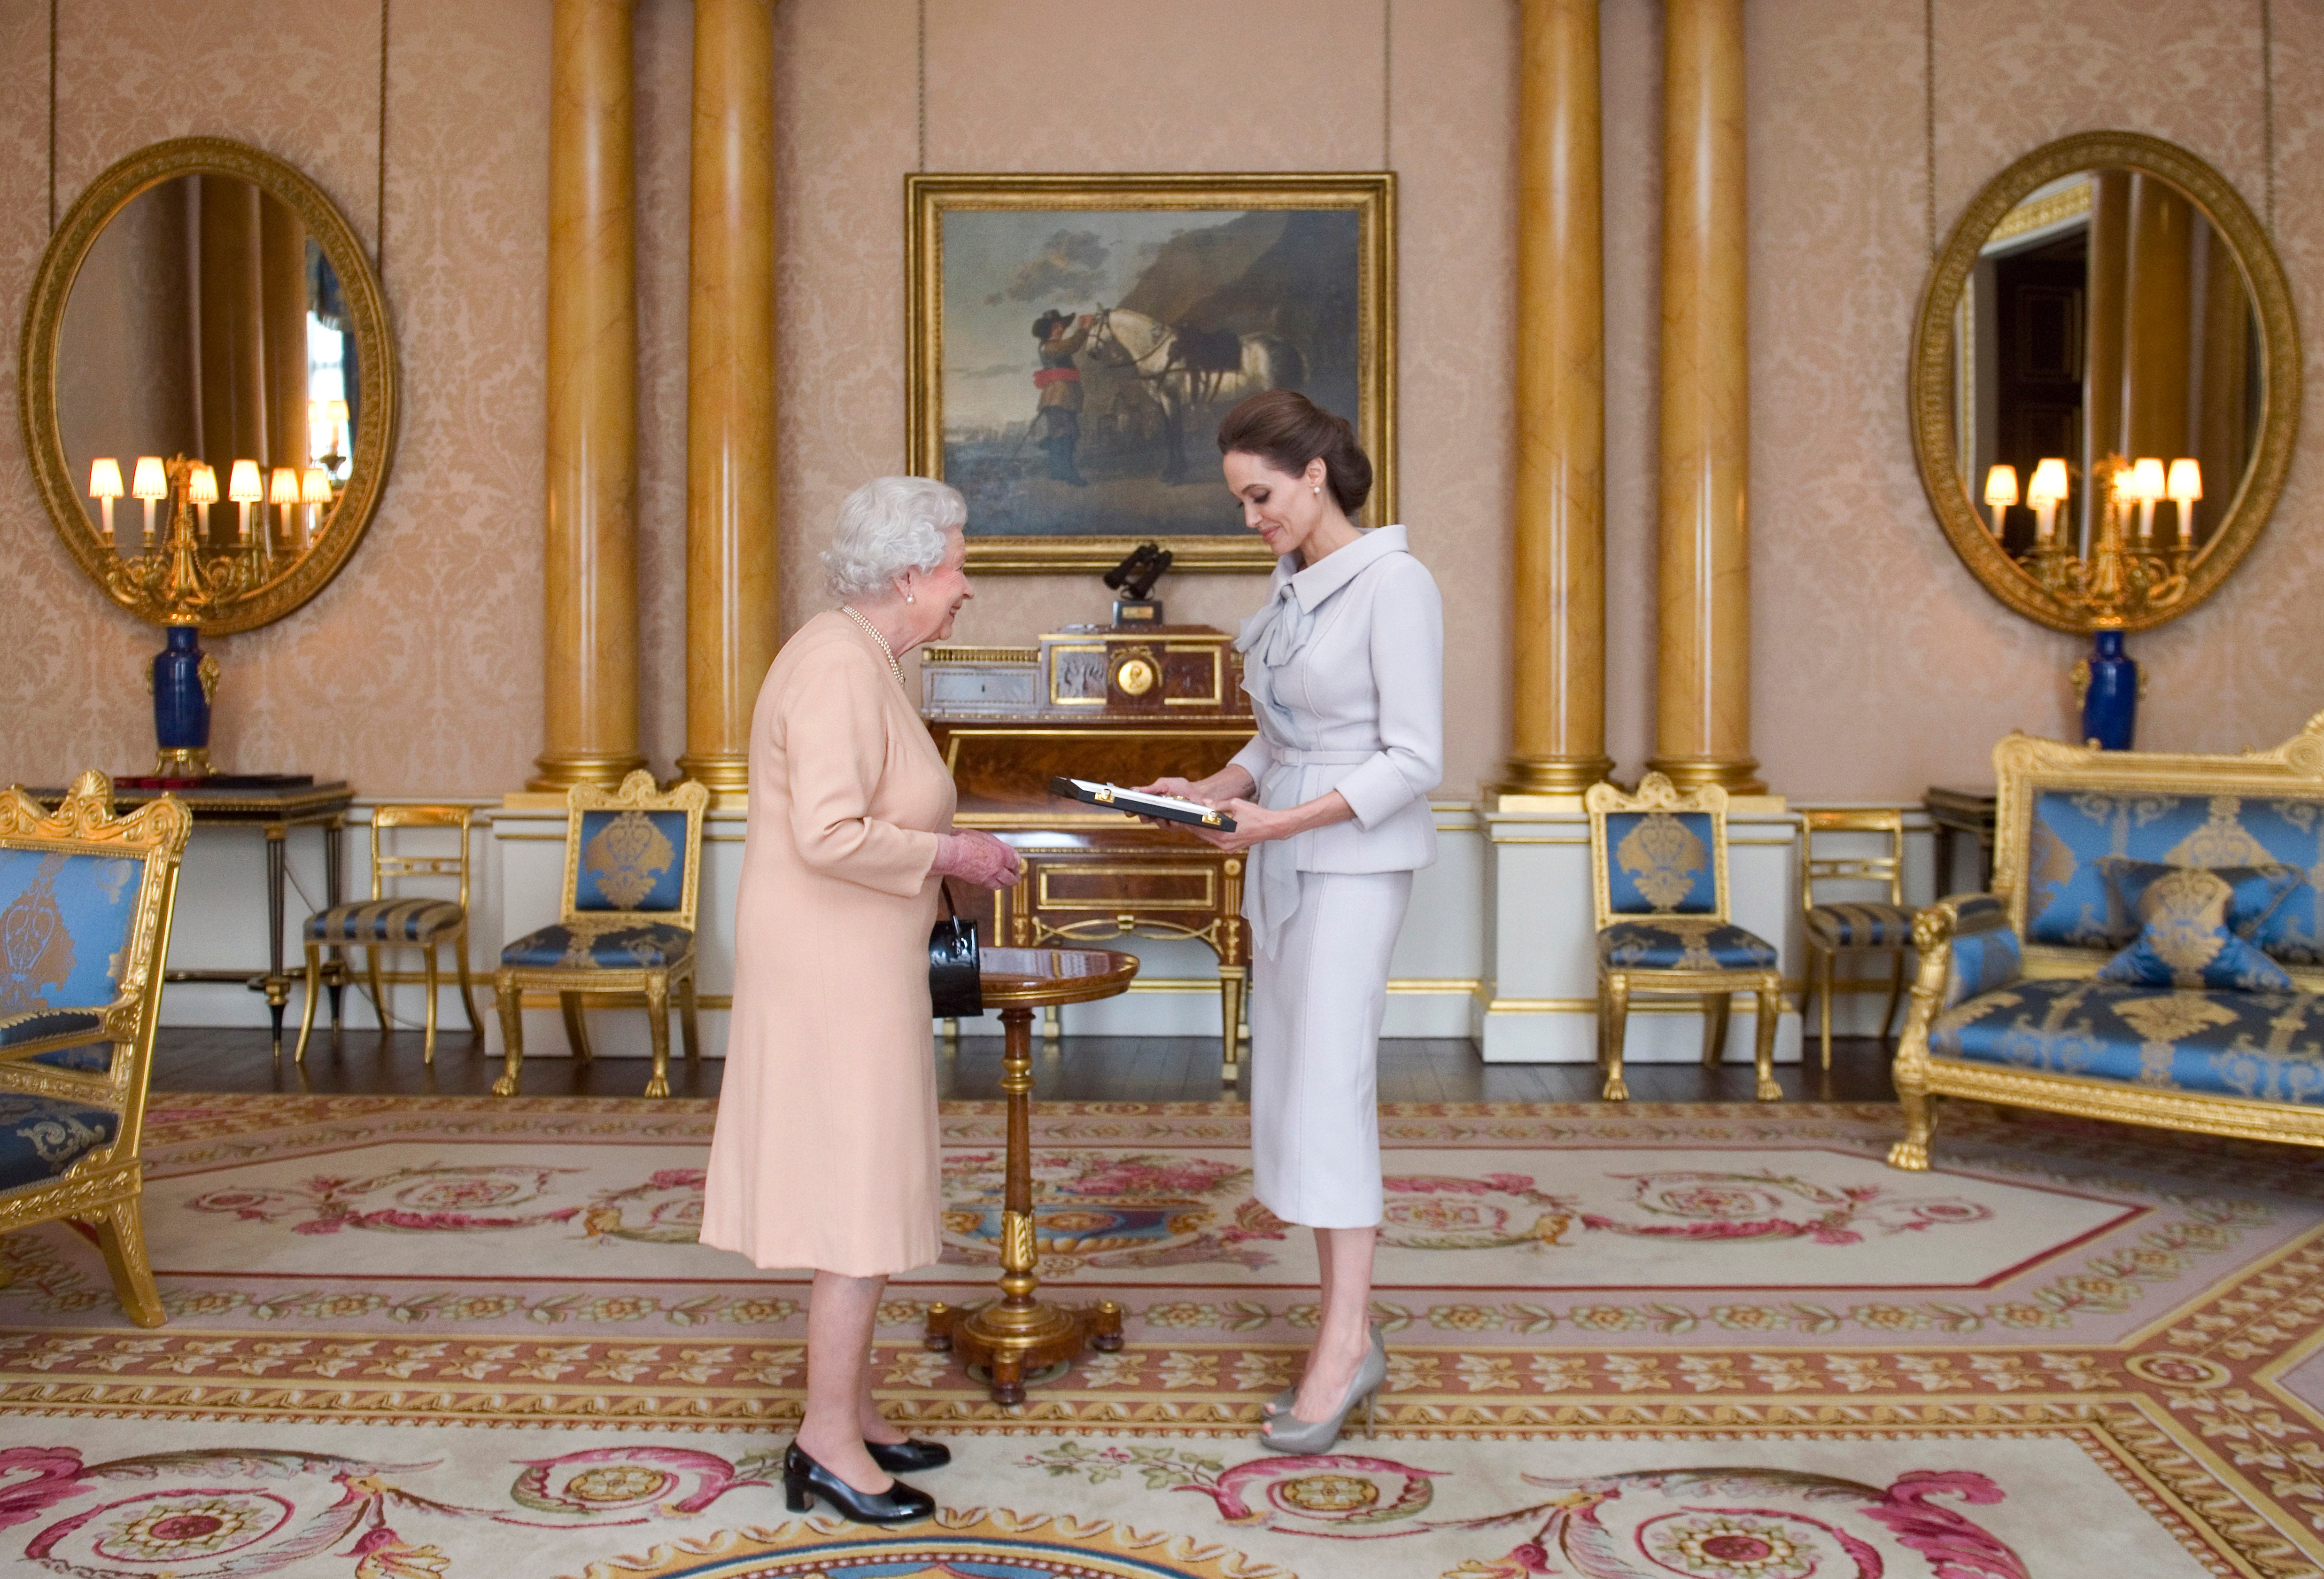 Actress Angelina Jolie is presented with the Insignia of an Honorary Dame Grand Cross of the Most Distinguished Order of St Michael and St George by Queen Elizabeth II in the 1844 Room at Buckingham Palace, 2014